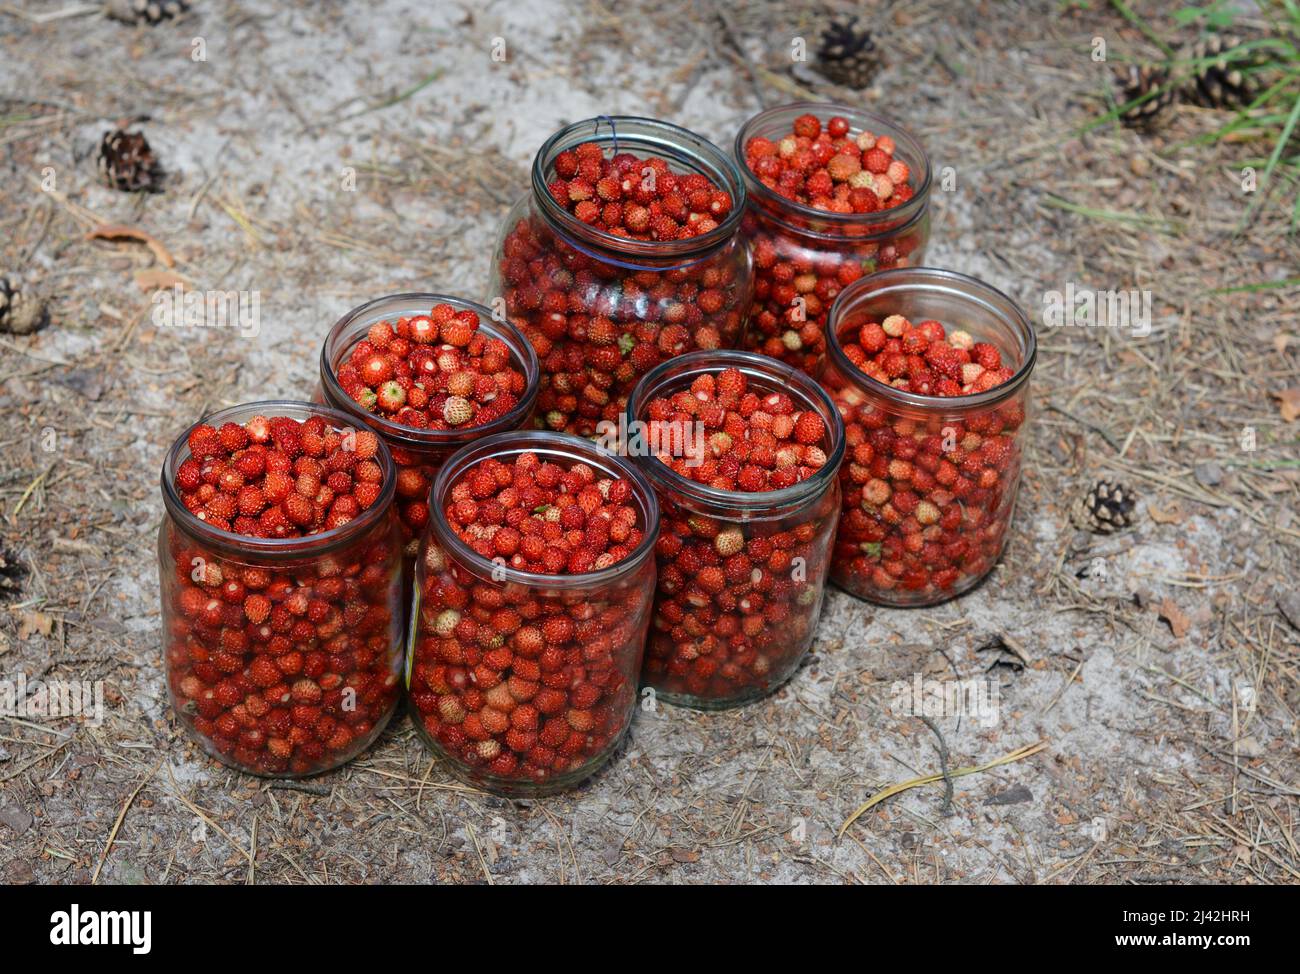 Picking wild strawberries in the forest. Glass jars full of red woodland strawberries. Stock Photo